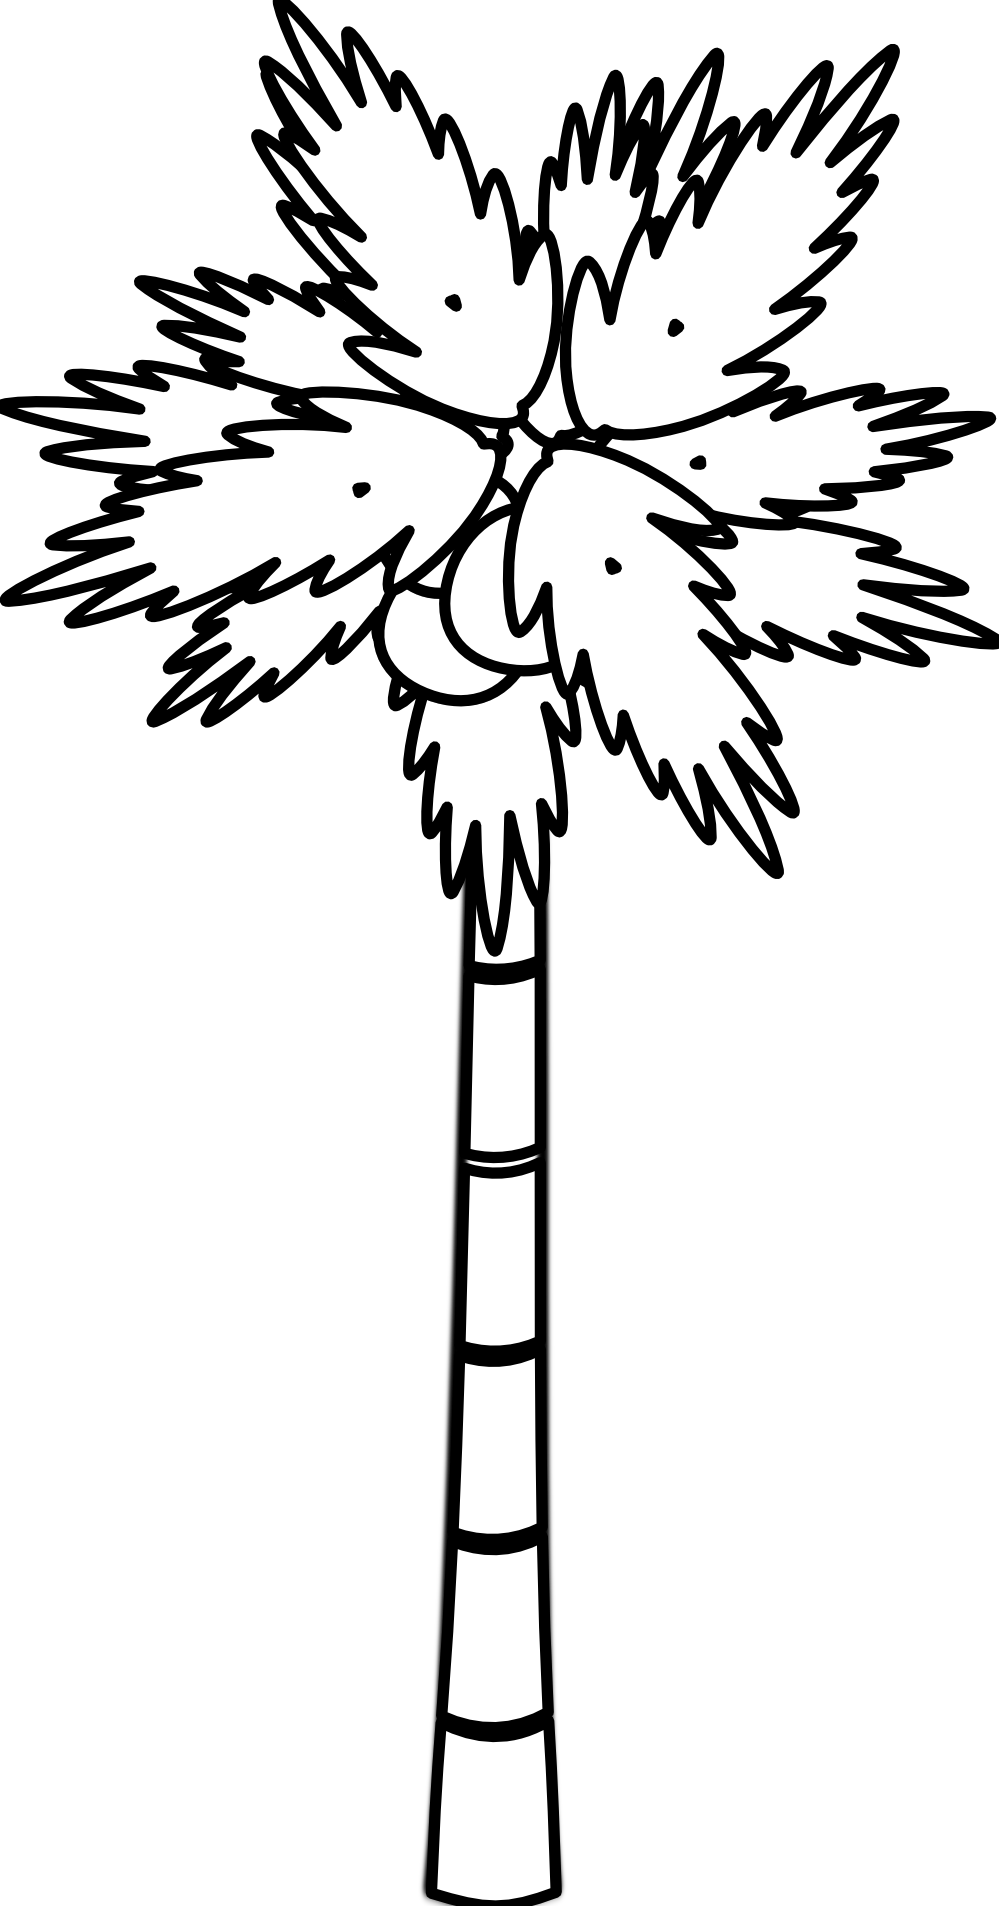 palm tree clipart black and white